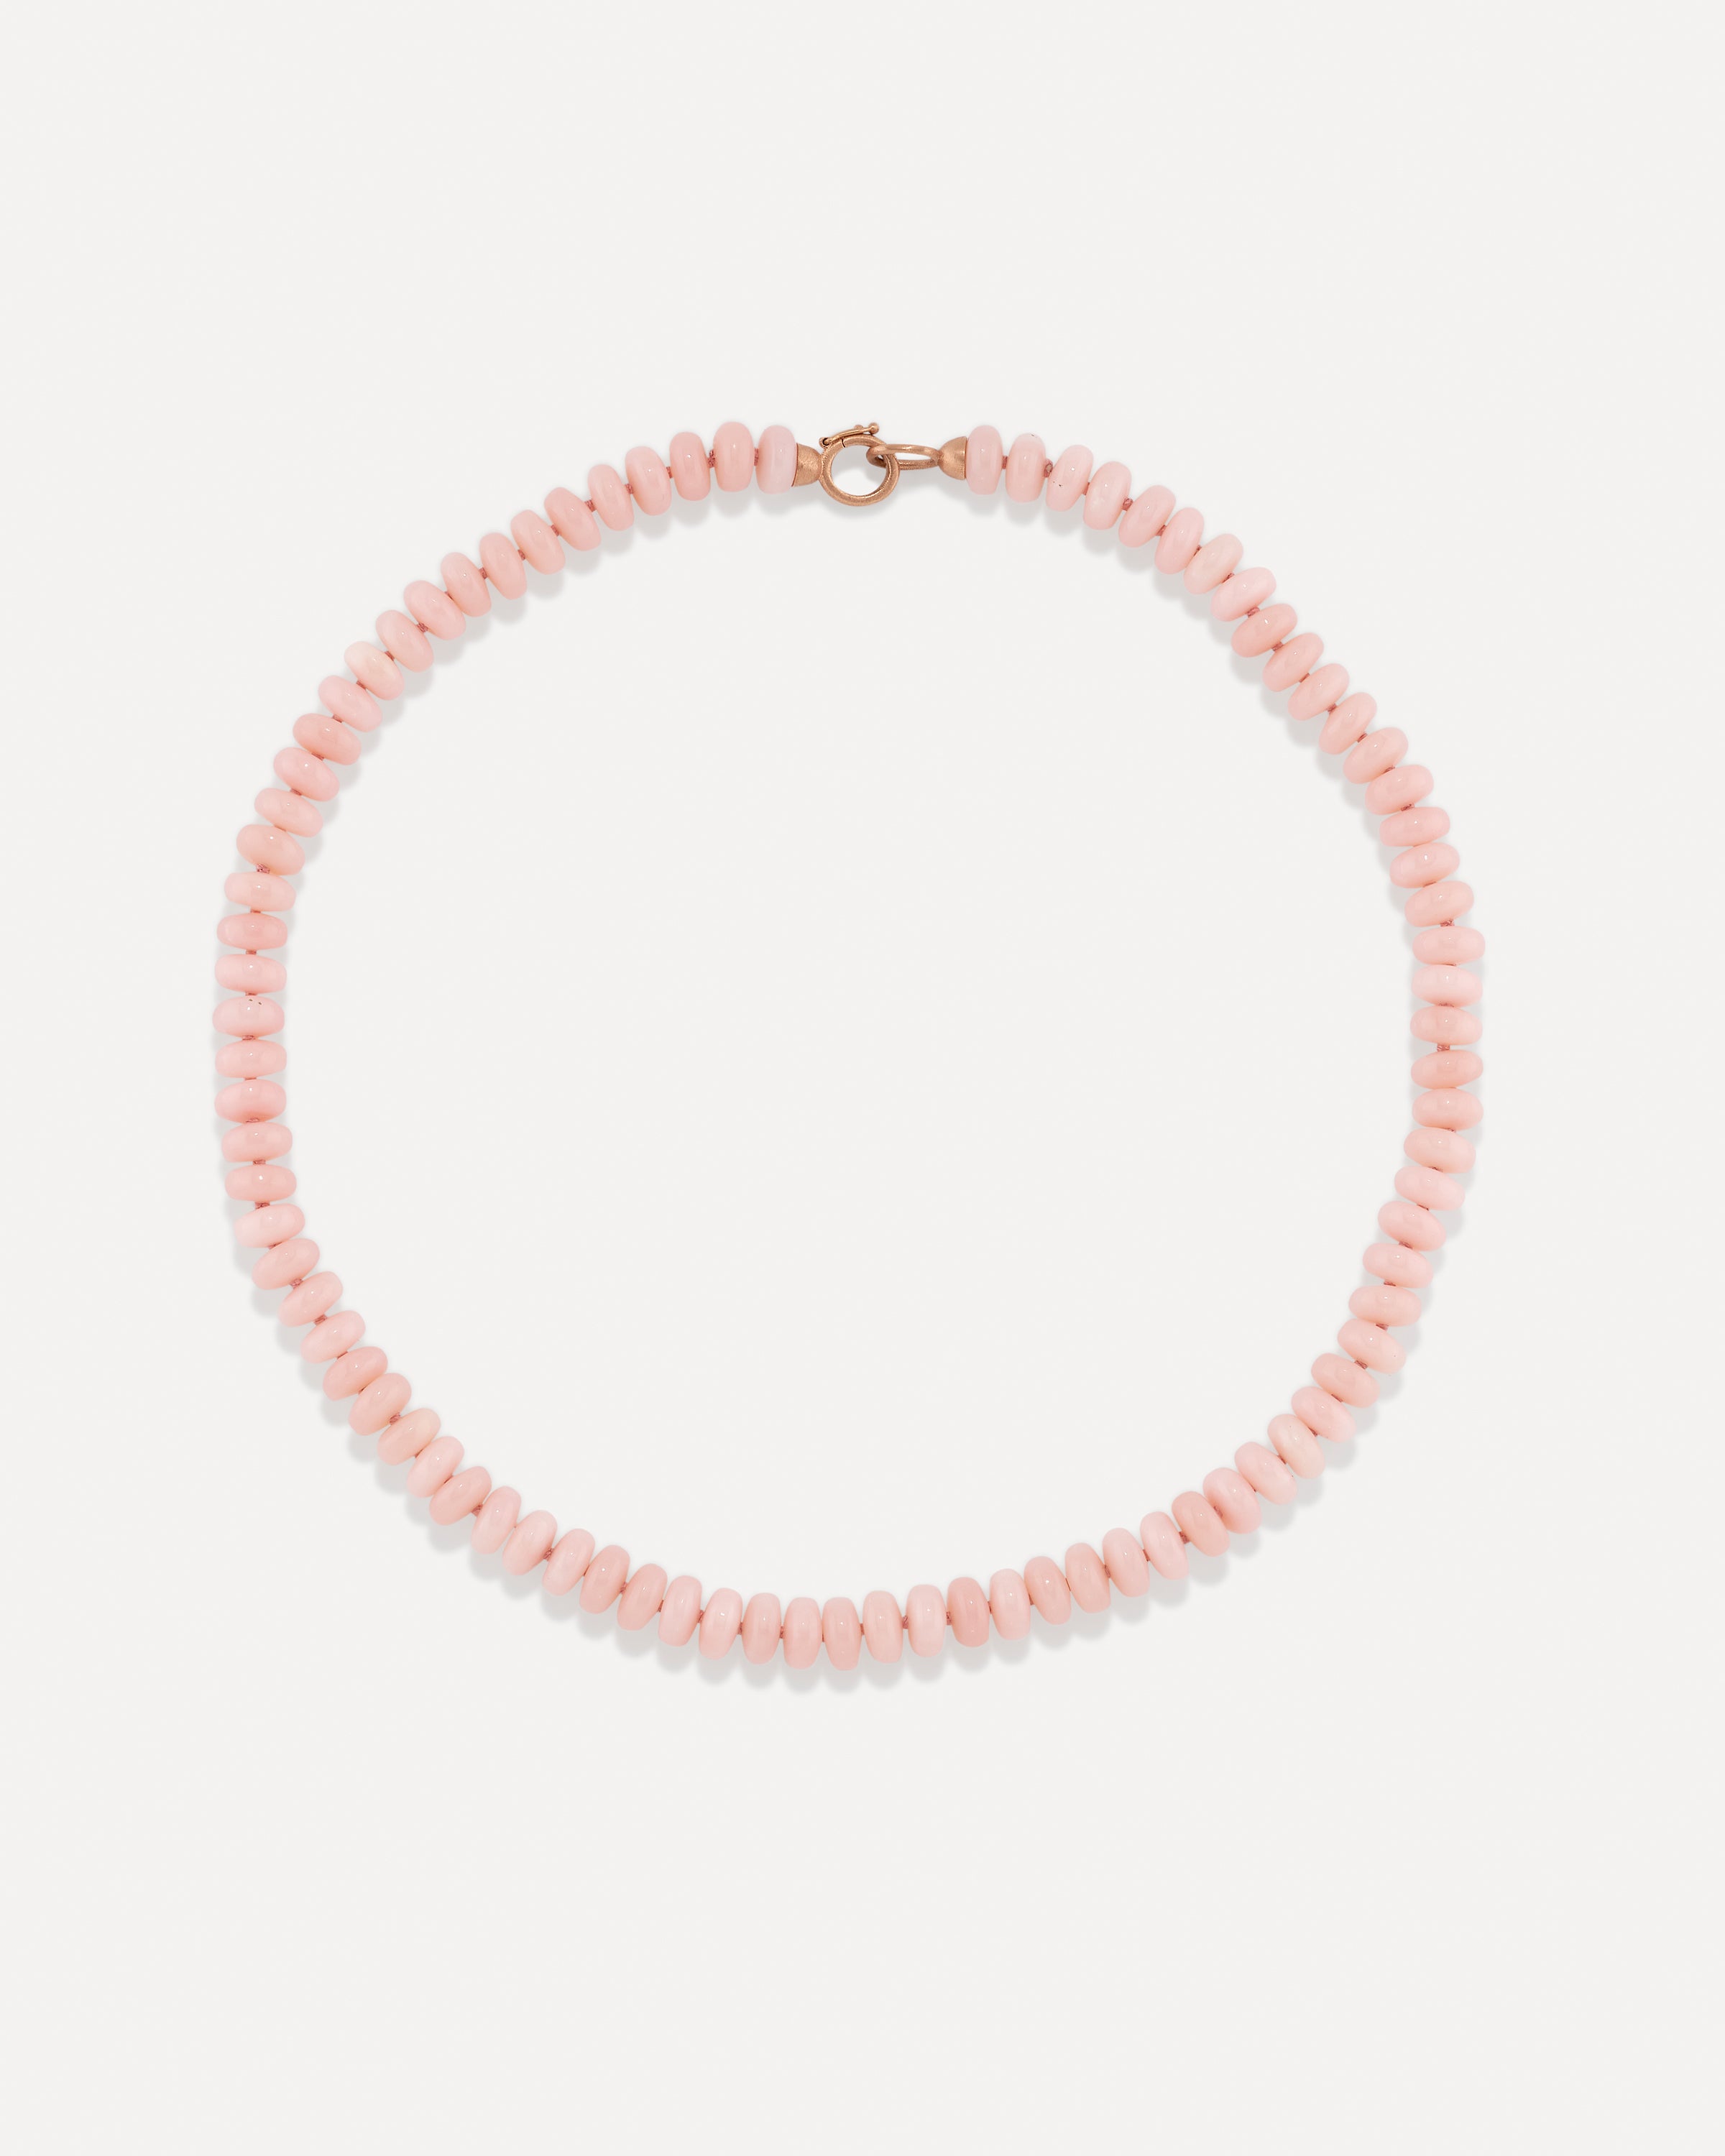 Best beaded necklaces for summer